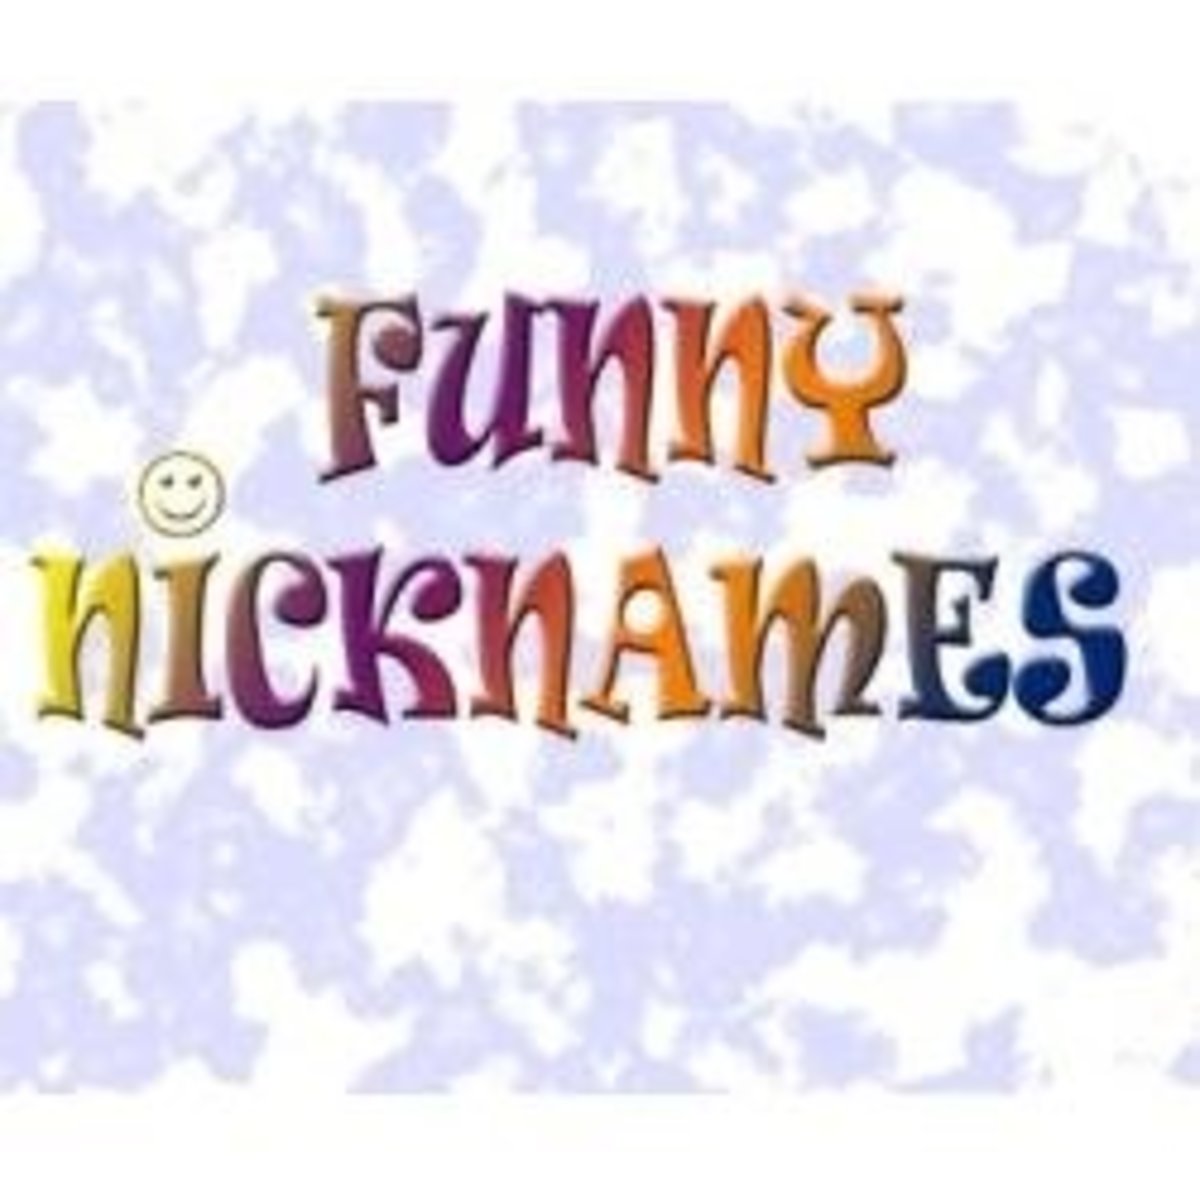 List Of Funny Nicknames Hubpages - cool funny nicknames for friends